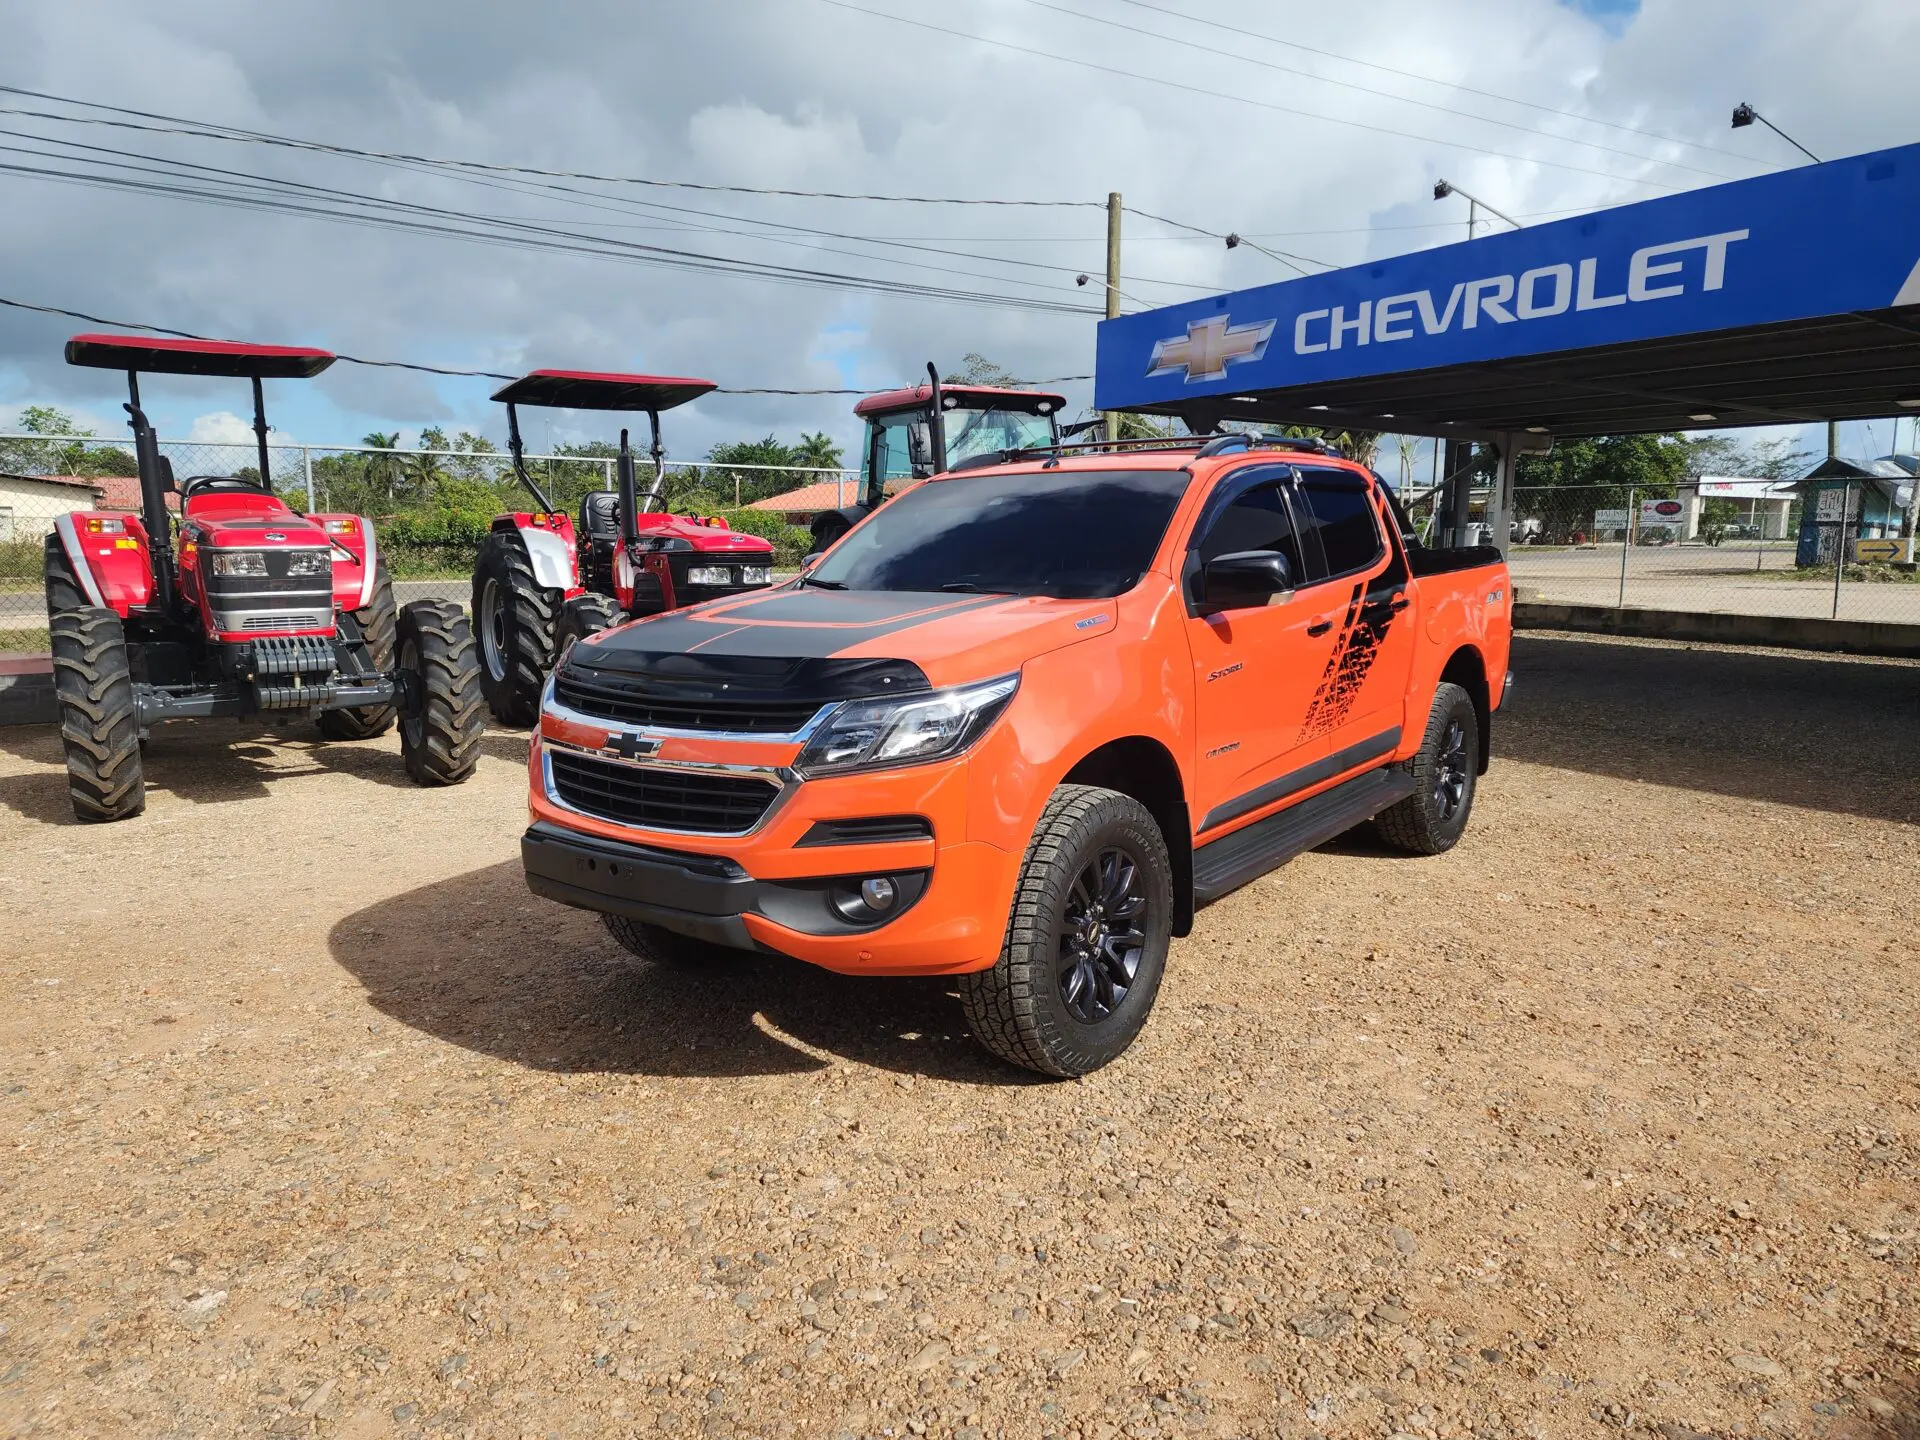 2020 Chevrolet Colorado High Country Storm - Pre-Owned main image